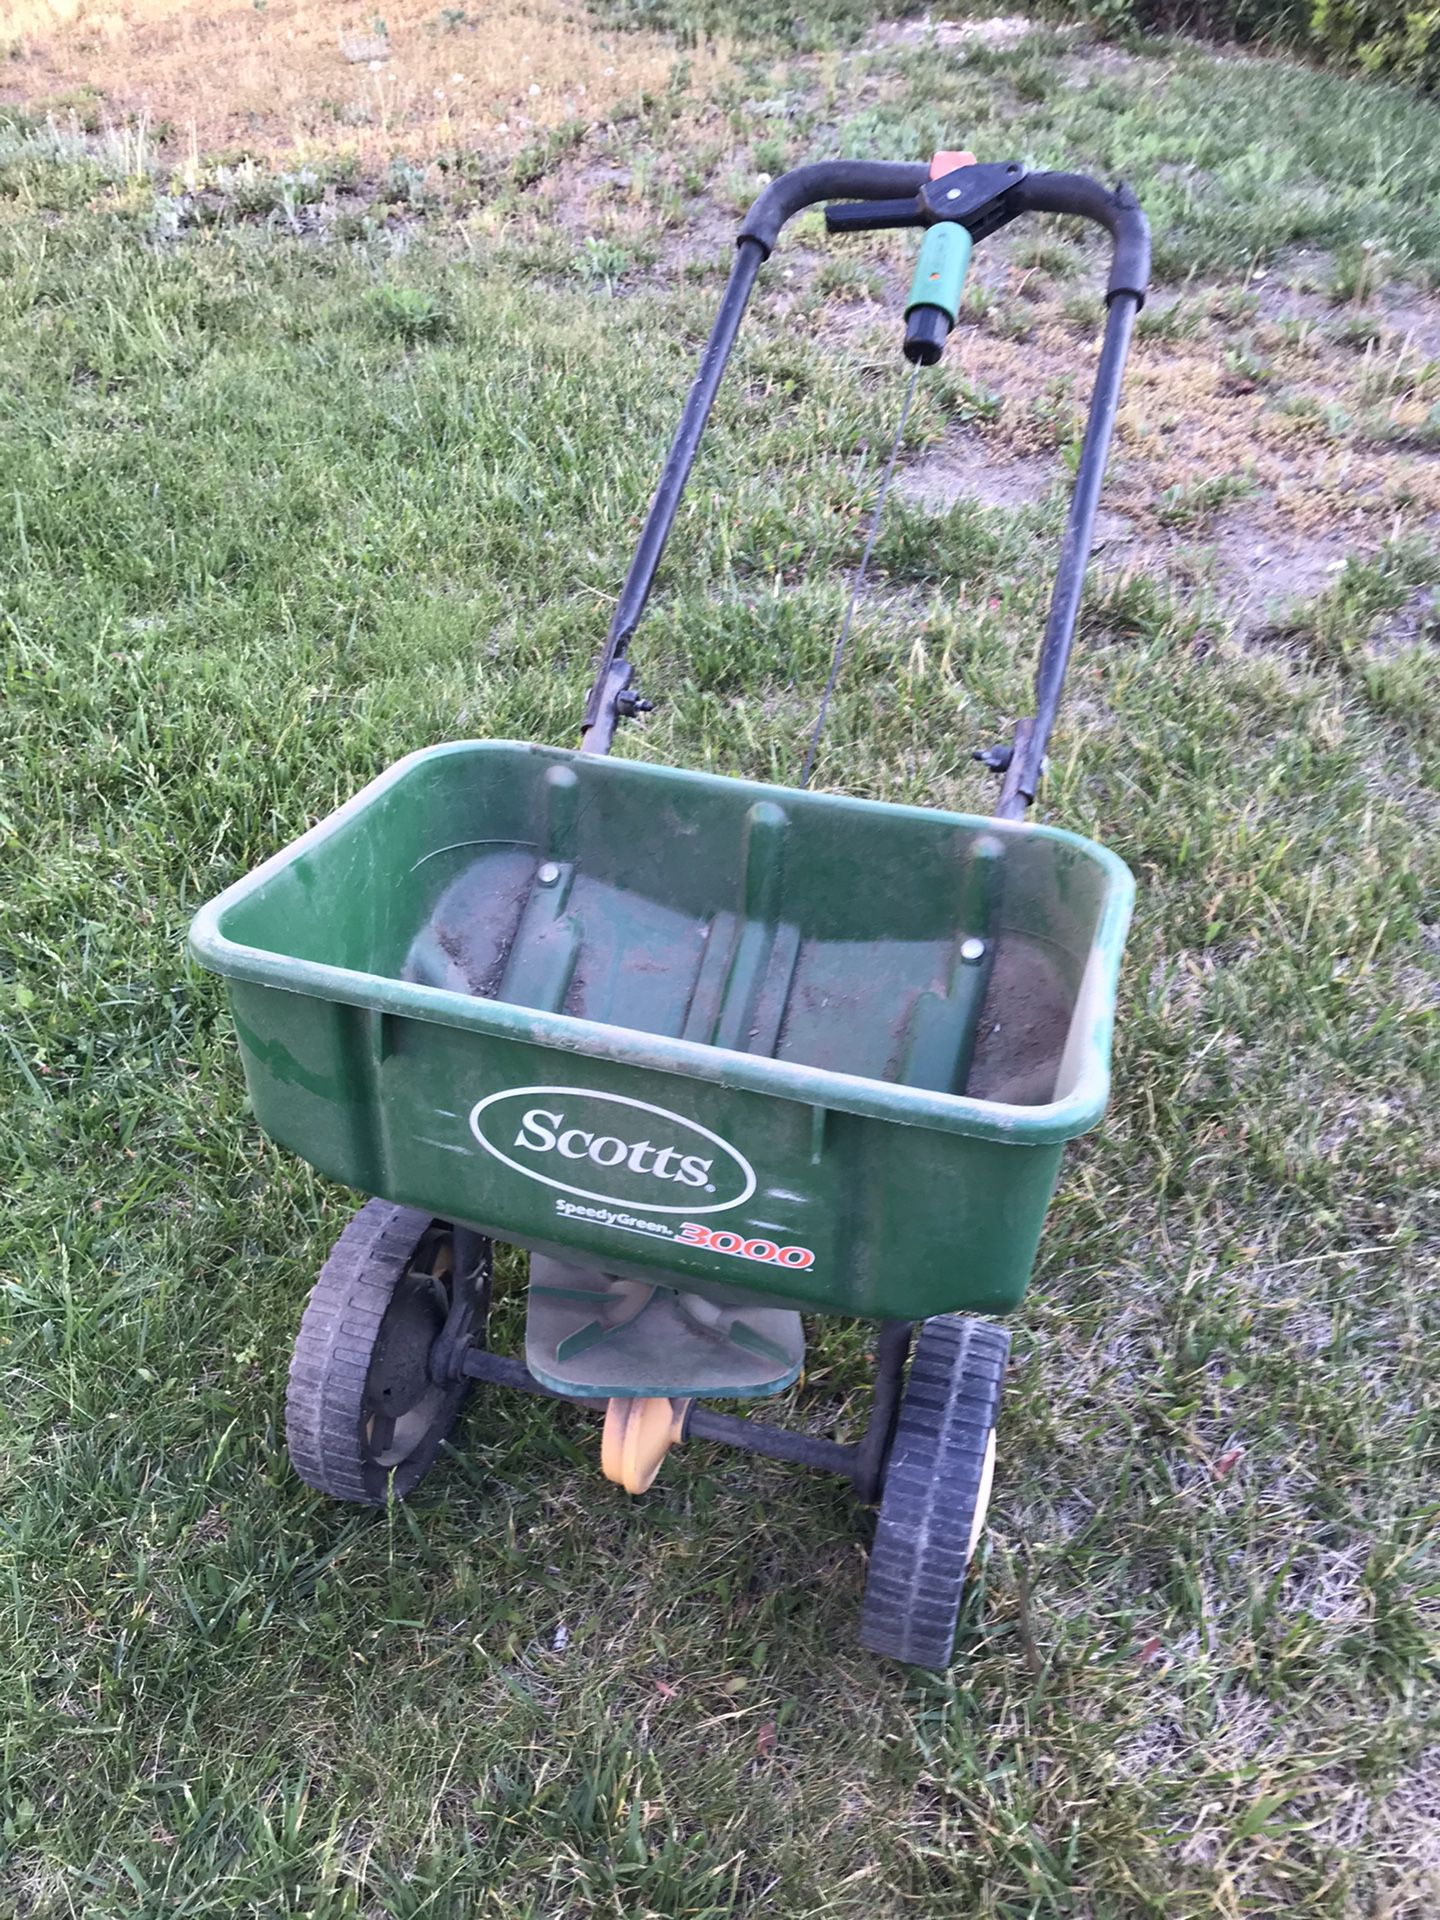 Scotts Speedy Green 3000 Broadcast Rotary Spreader for Seed/Fertilizer. Good condition, rarely used. ***Upper left hand foam grip on the handle bar i